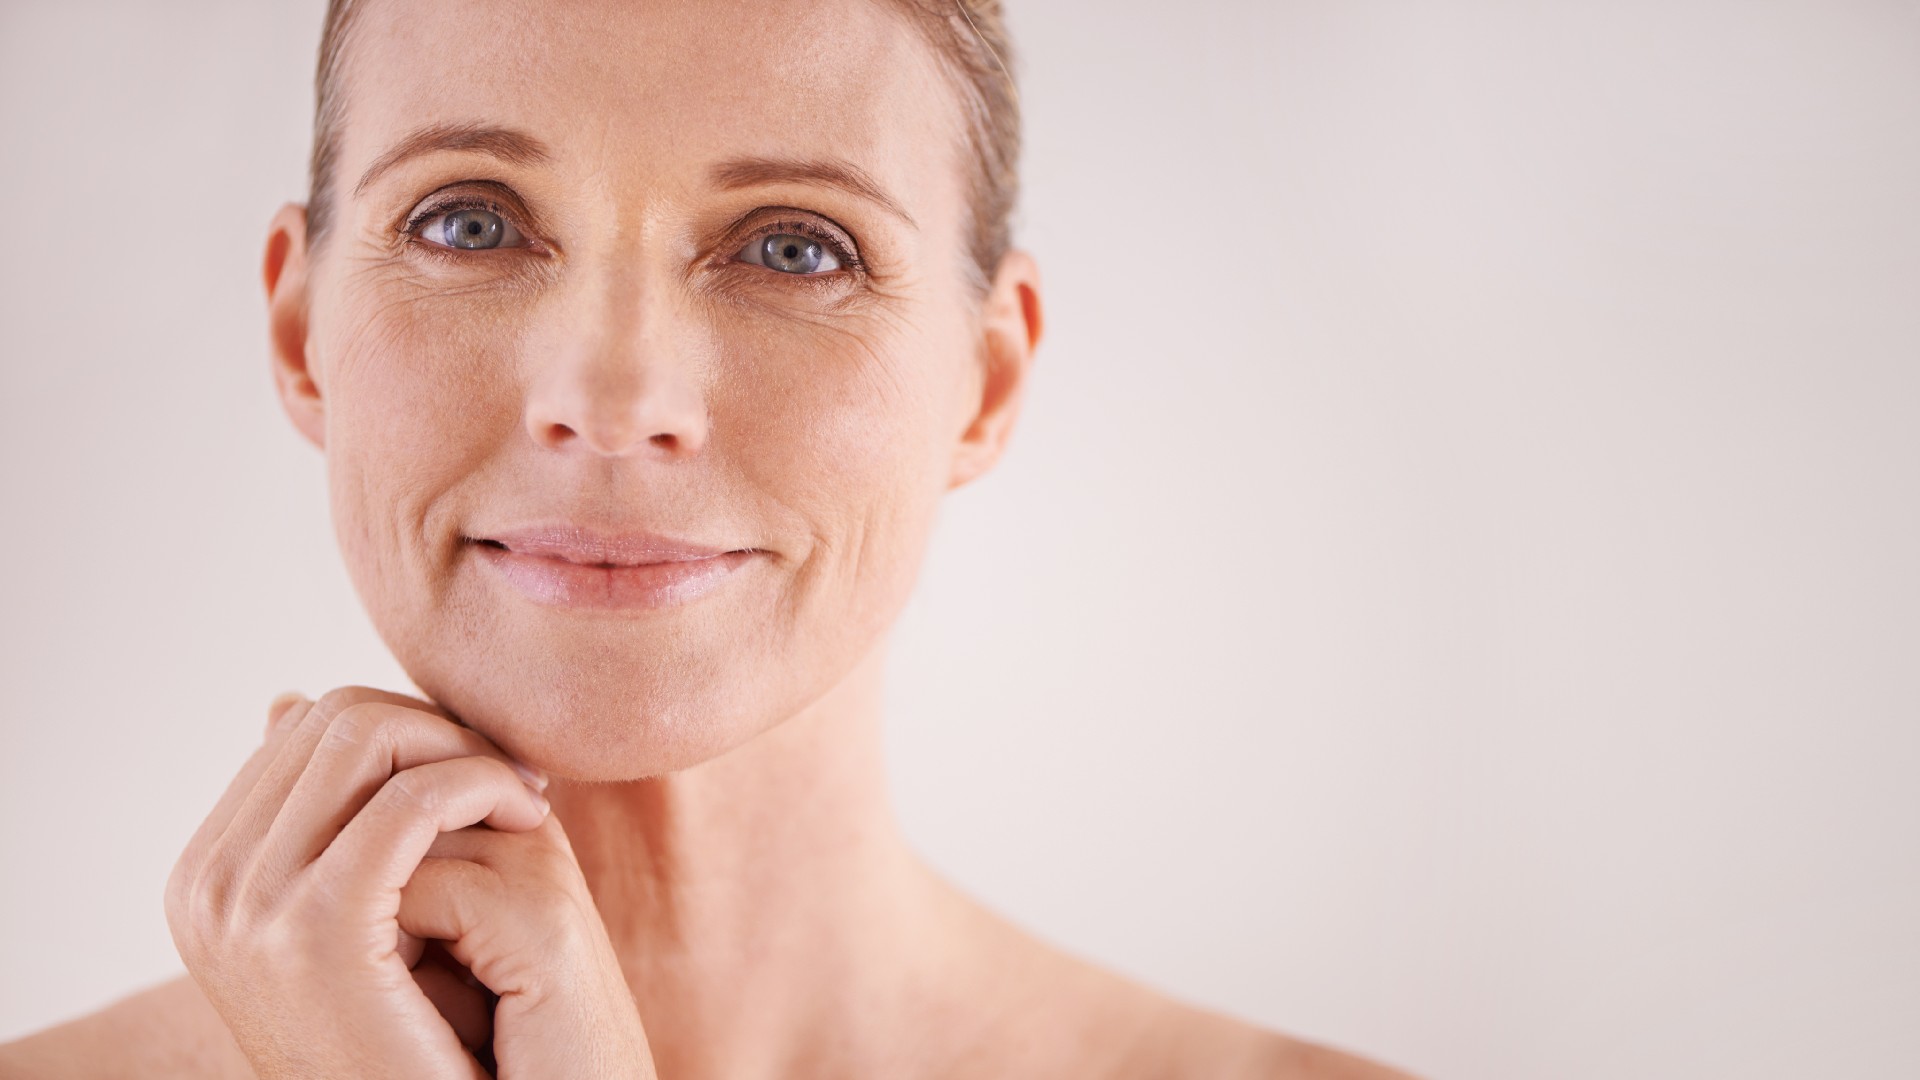 10 Proven Ways to Prevent Wrinkles